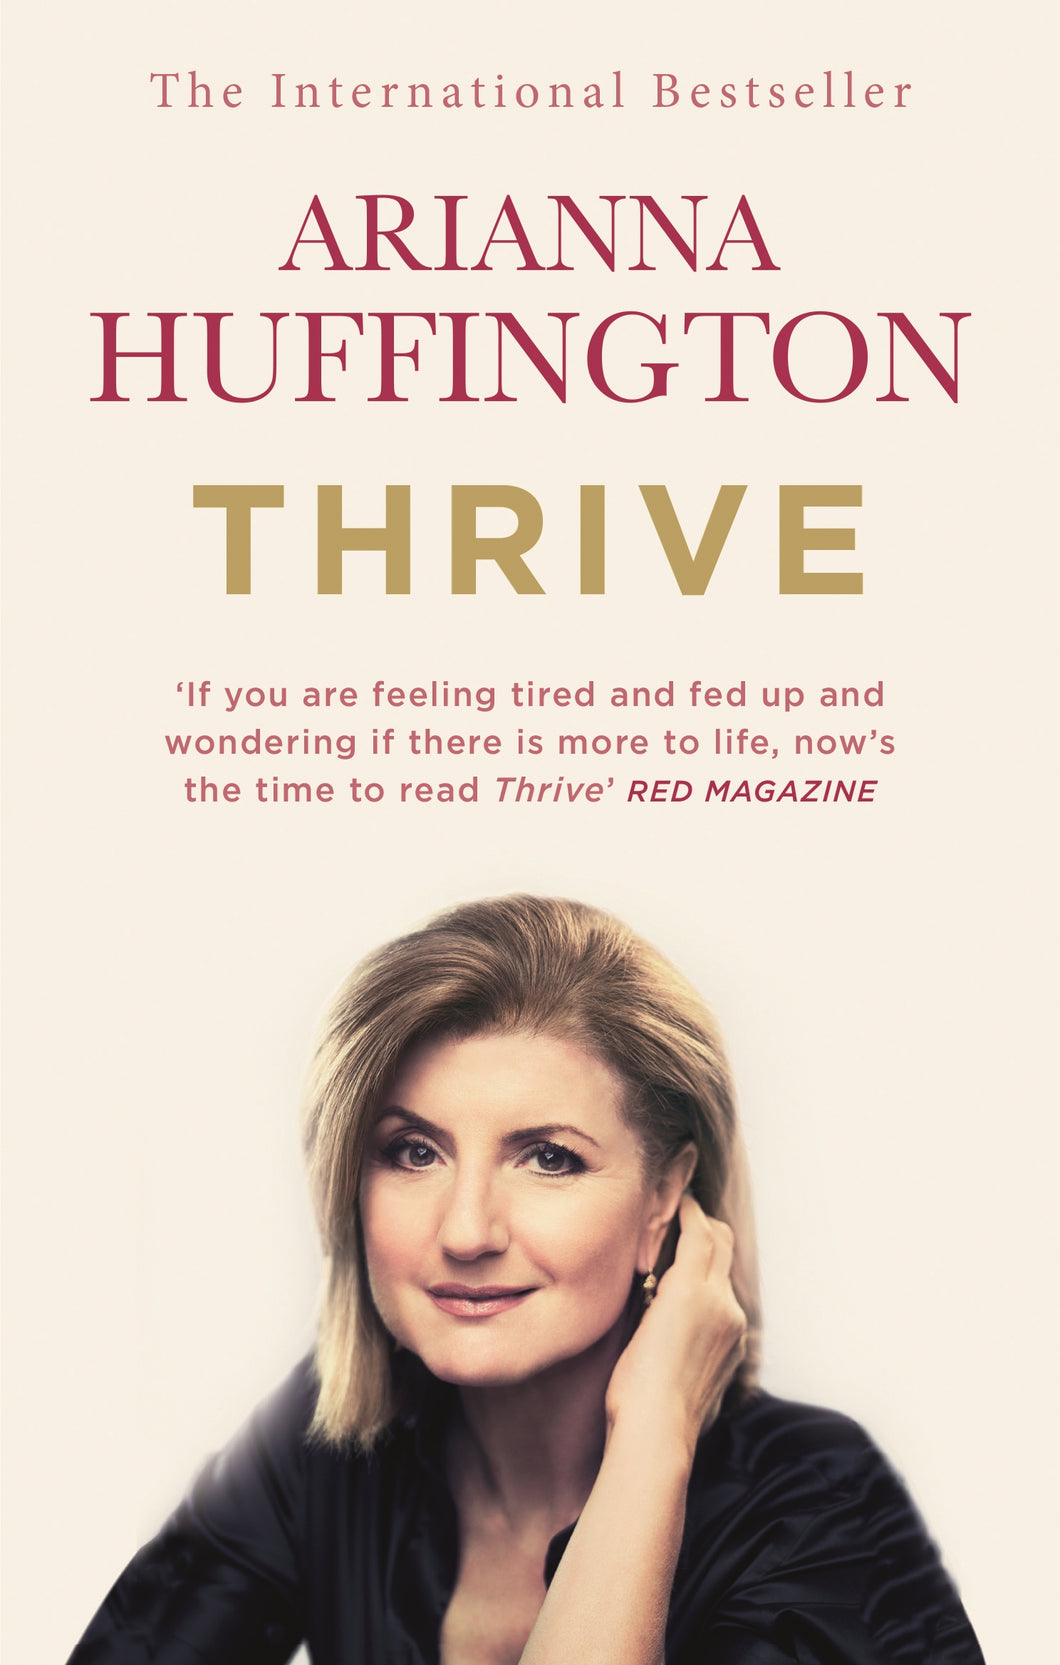 Thrive by Arianna Huffington: stock image of front cover.